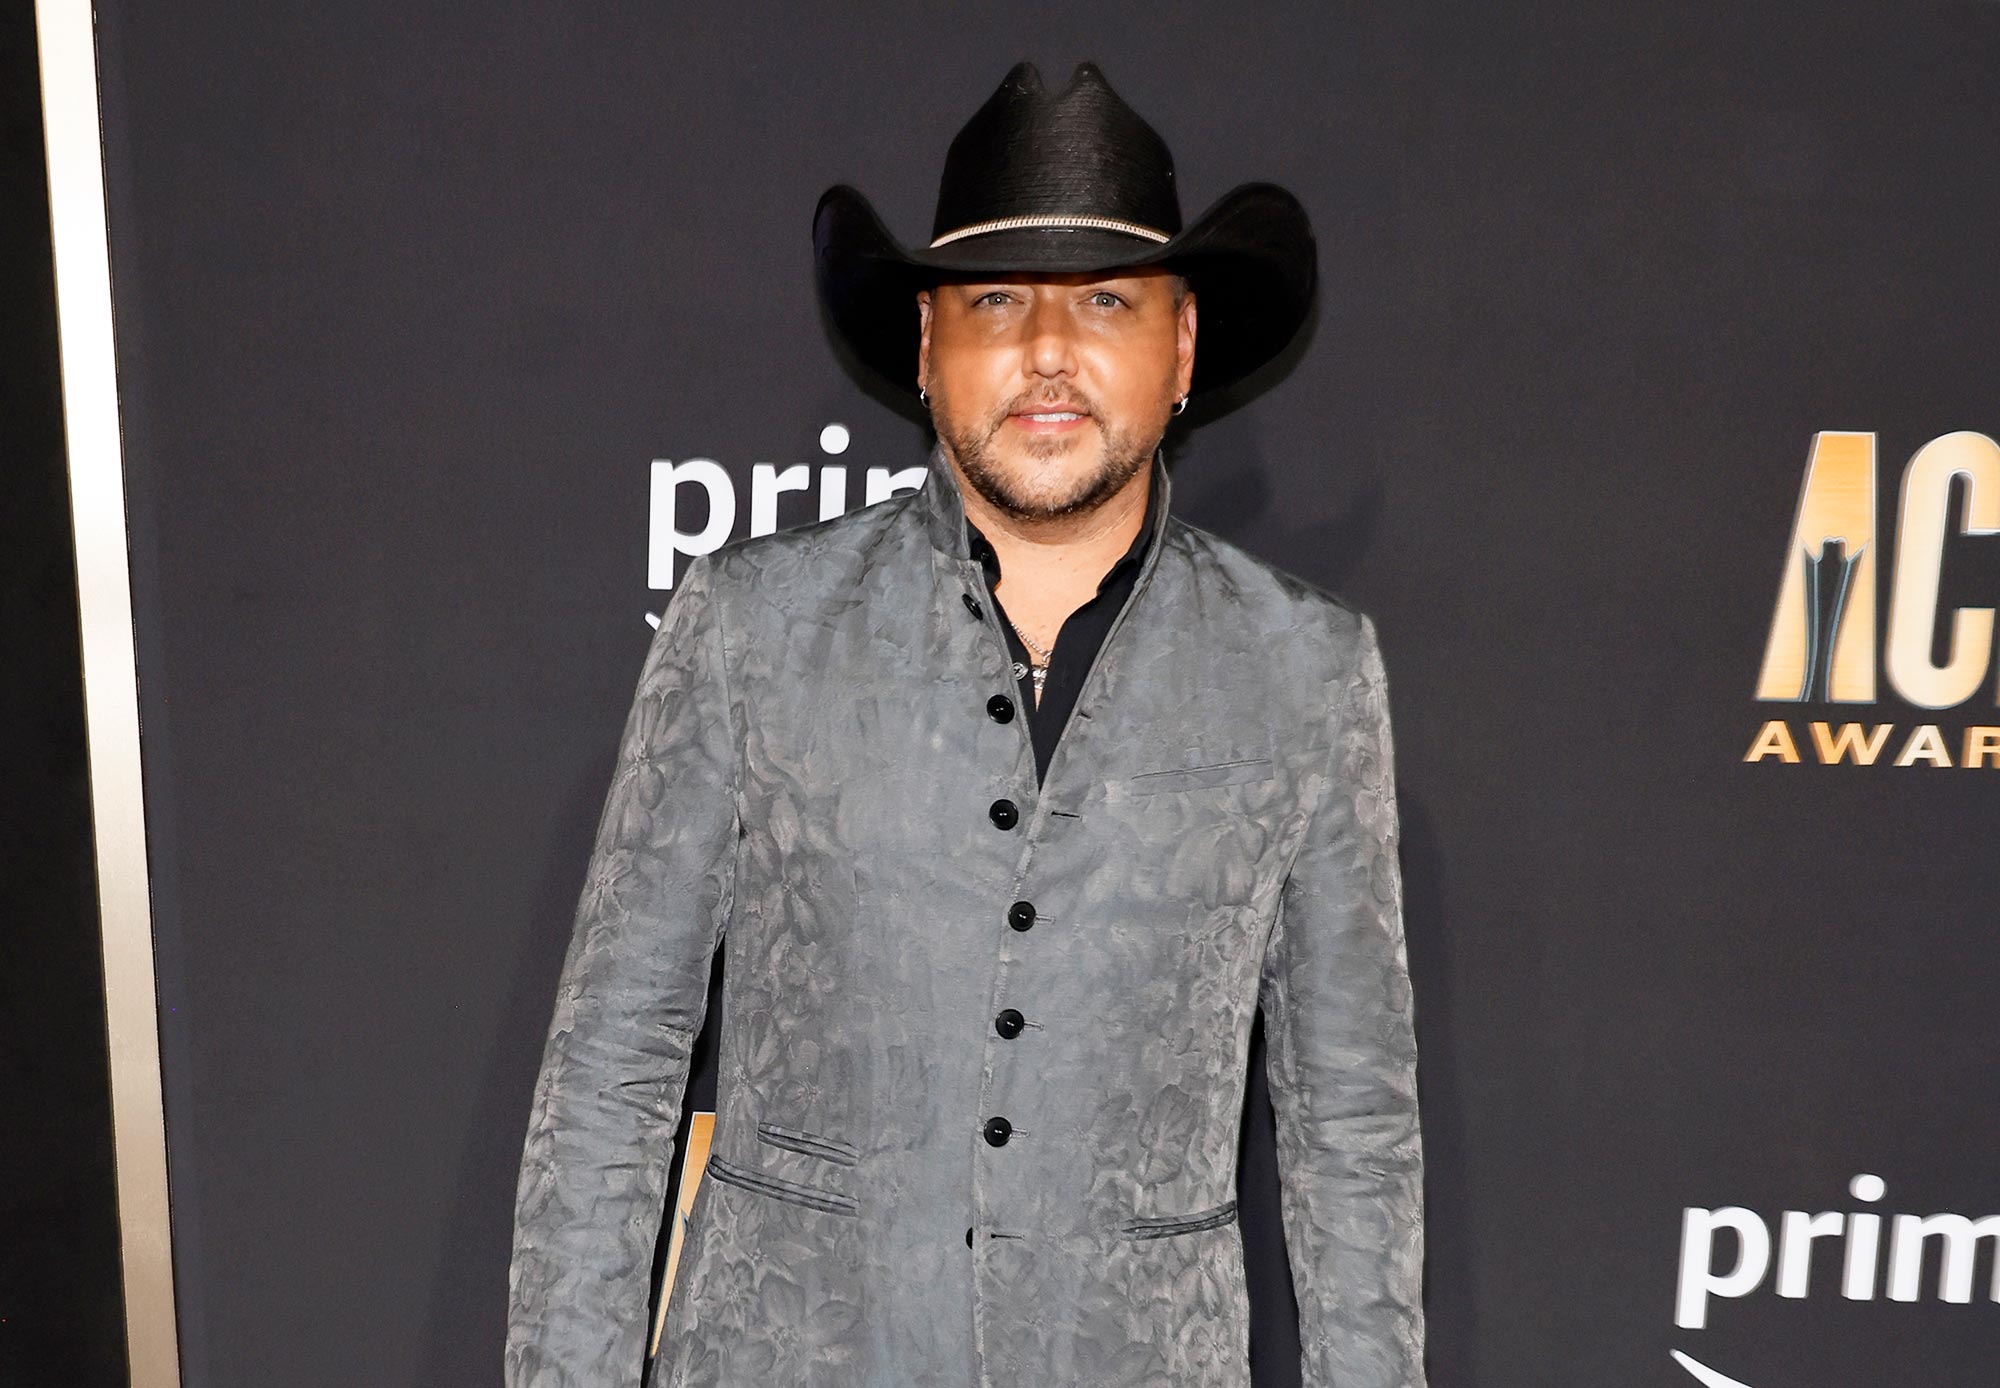 Jason Aldean Sets Return to CMT Music Awards After Controversy